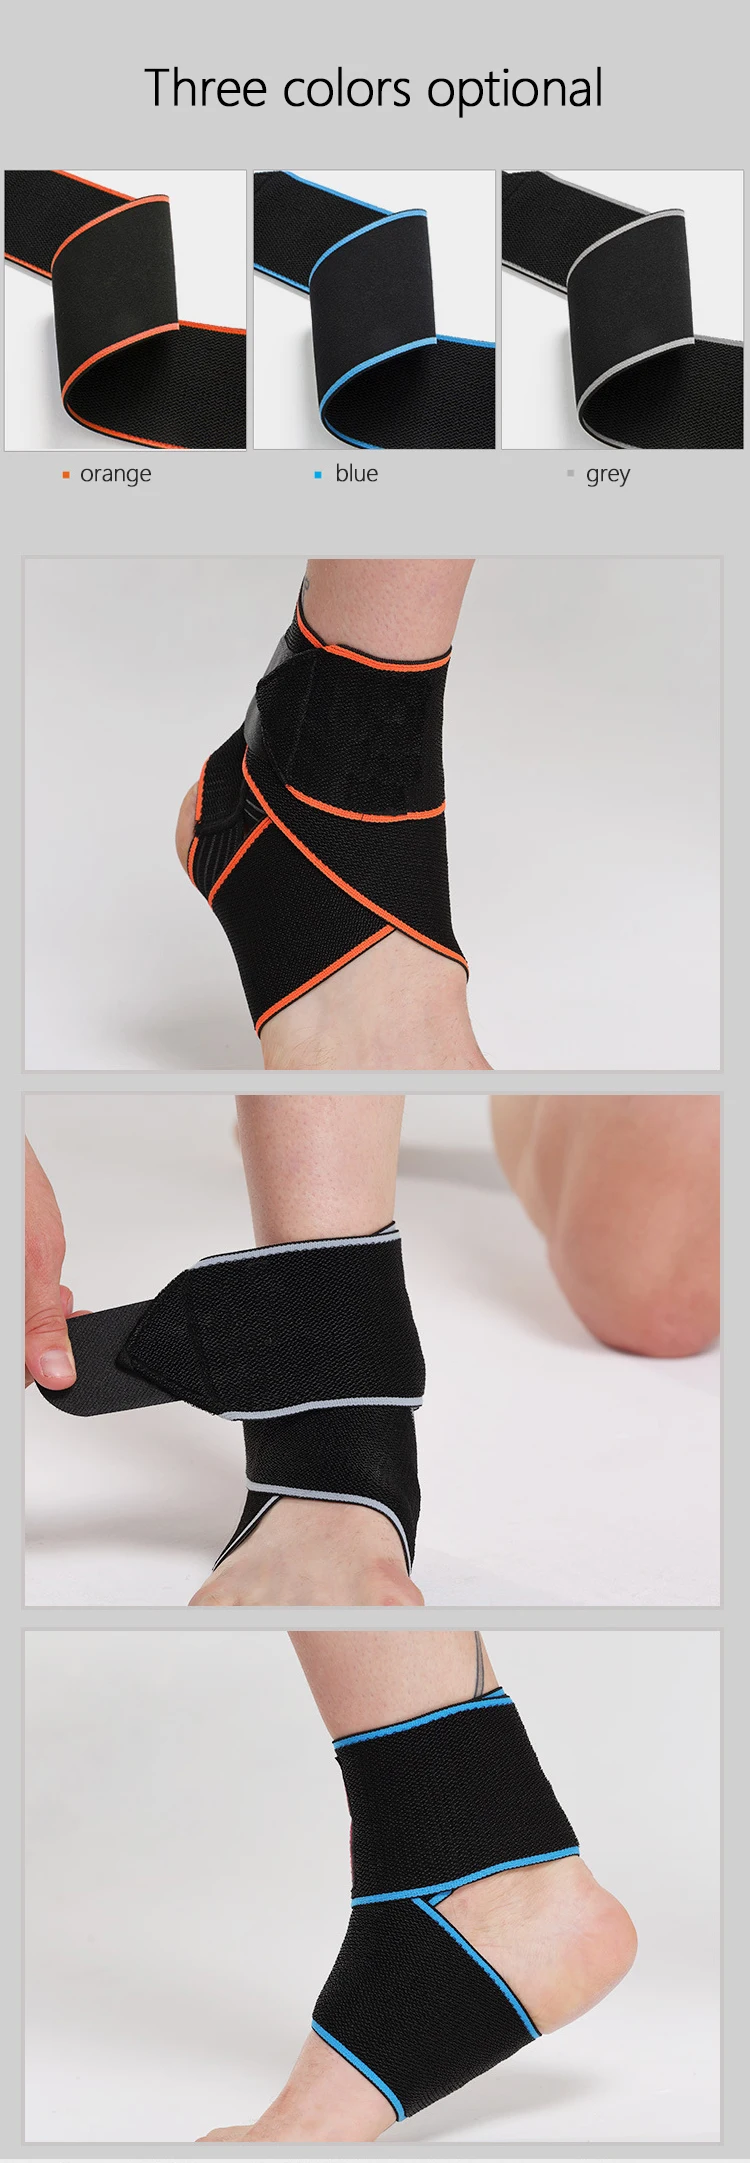 Enerup Outdoor Sports Knitted Neoprene Compression Orthosis Ankle Support Strap Foot Brace Kegunaan Compression Foot Sleeve